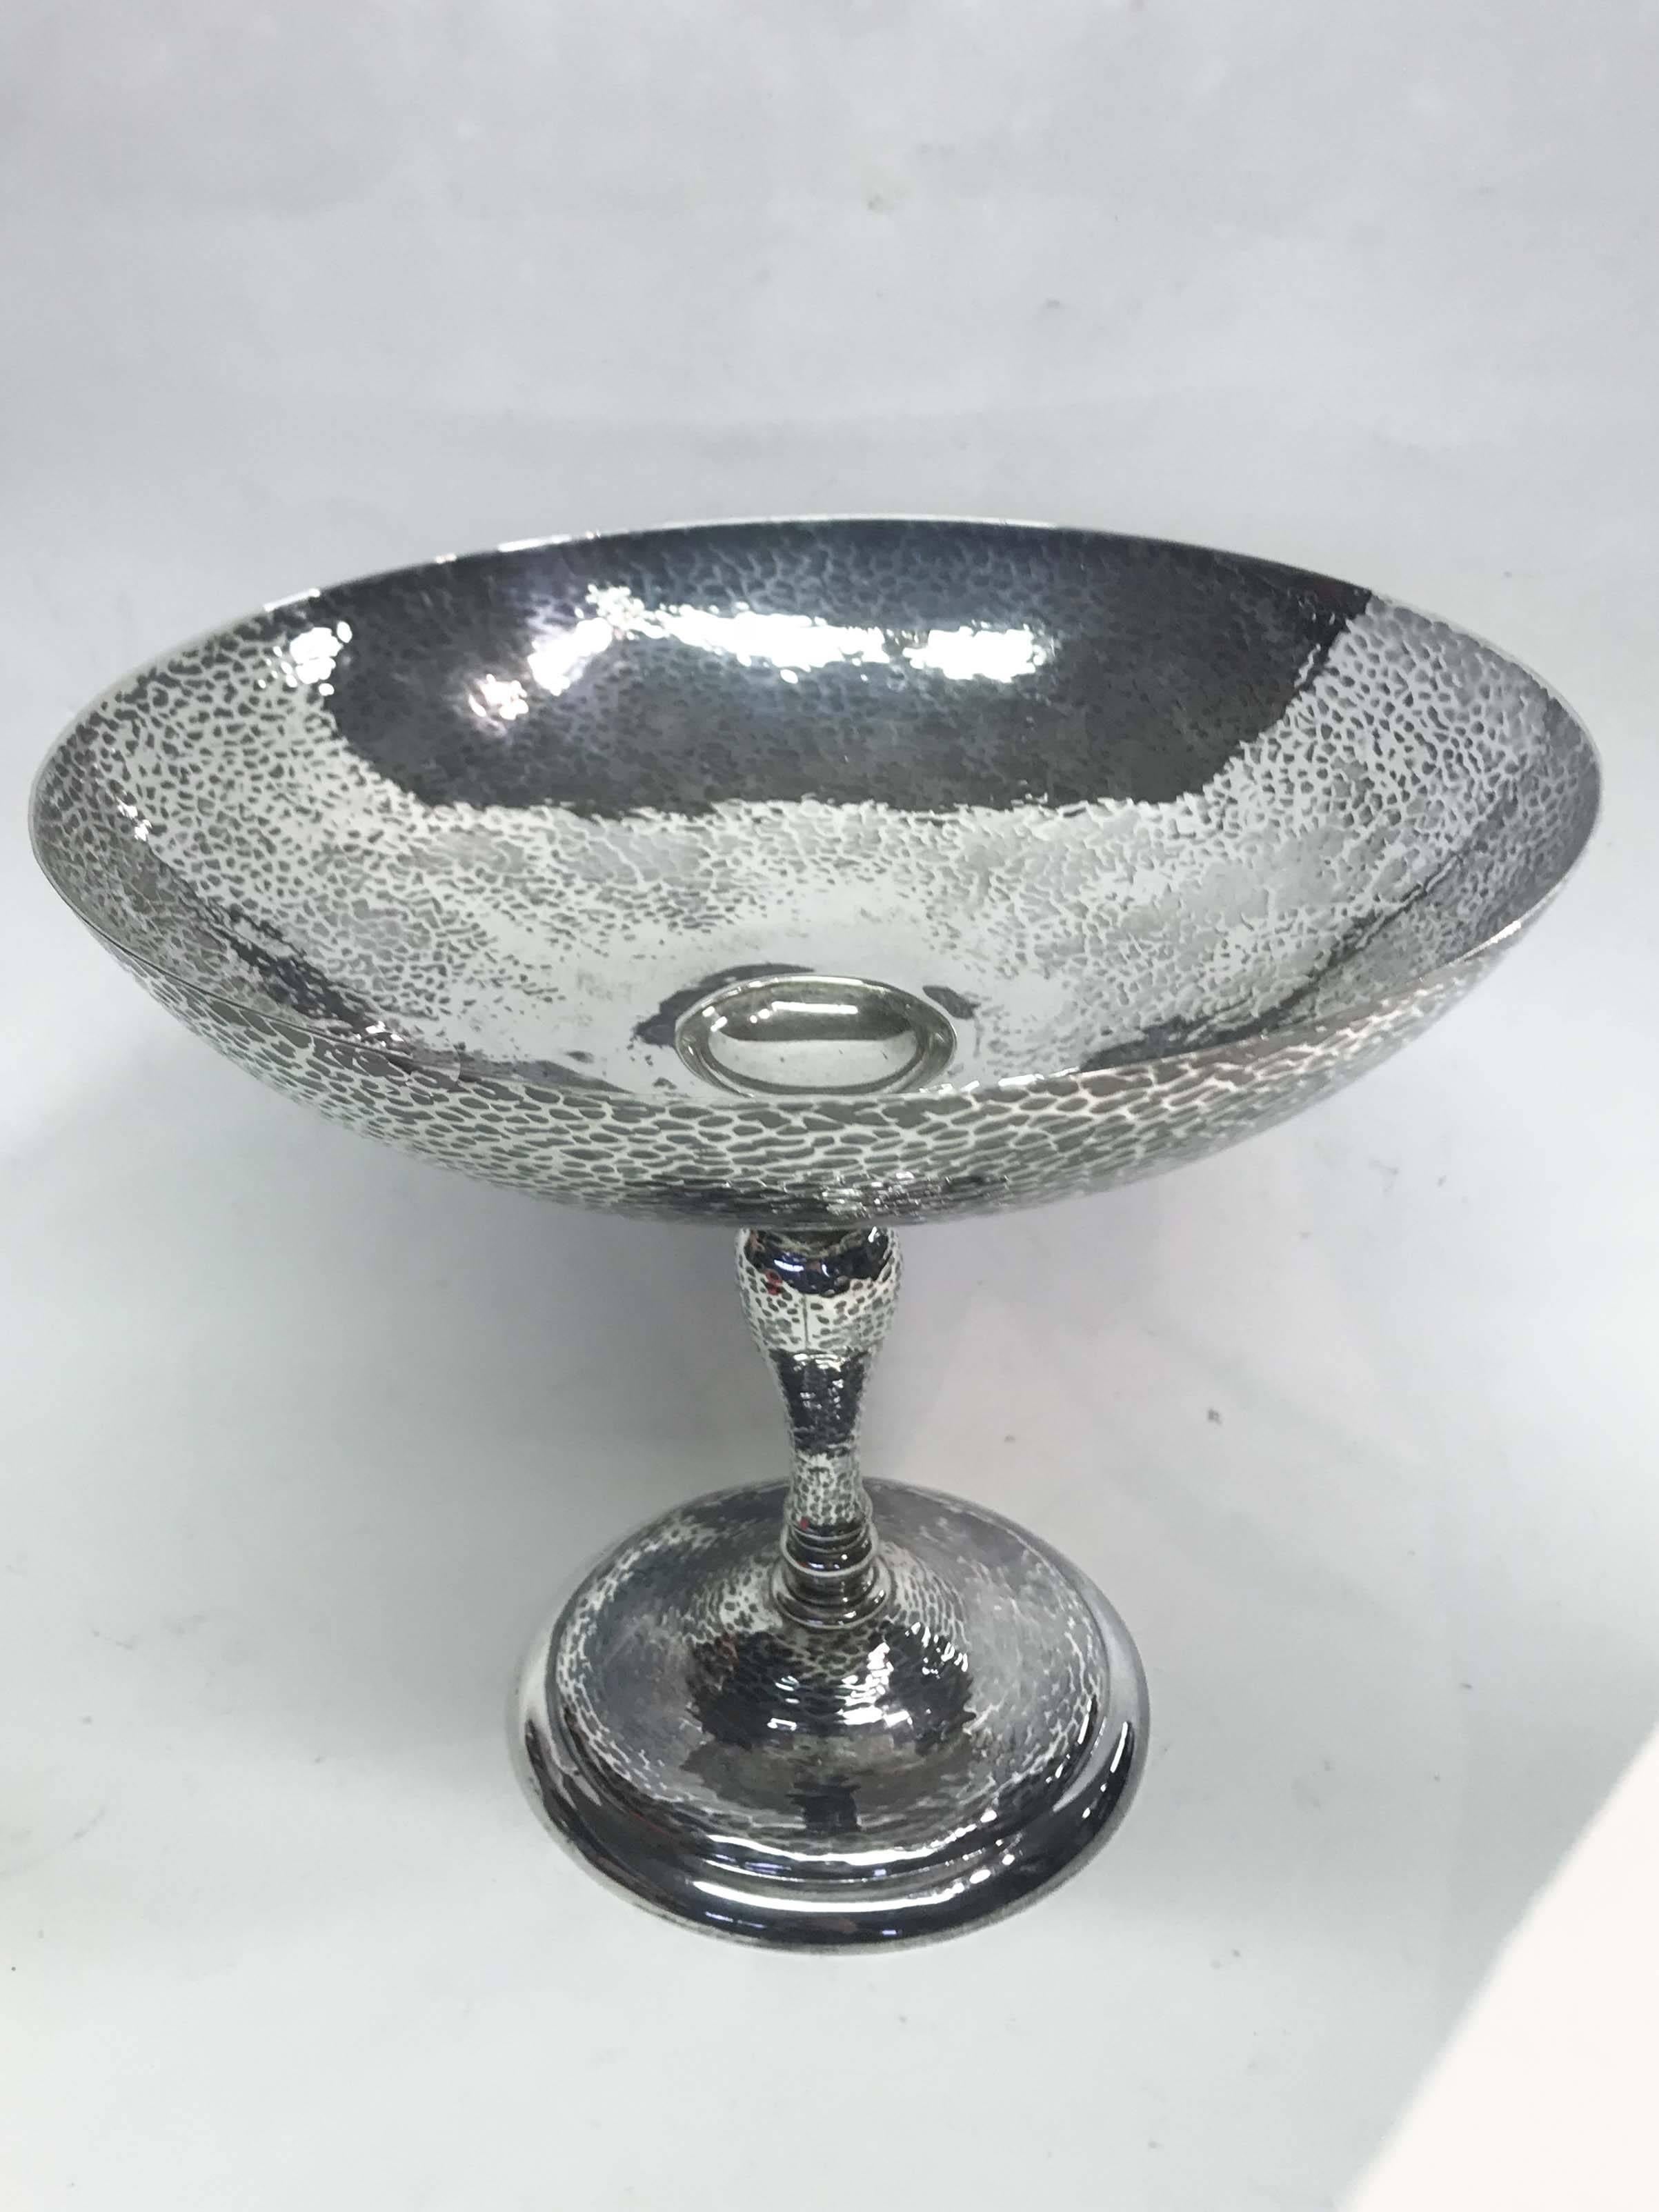 A beautifully made English sterling silver hammered Comport. A quality production from the famous firm of James Dixon & Sons. Hallmarked 1905, England.